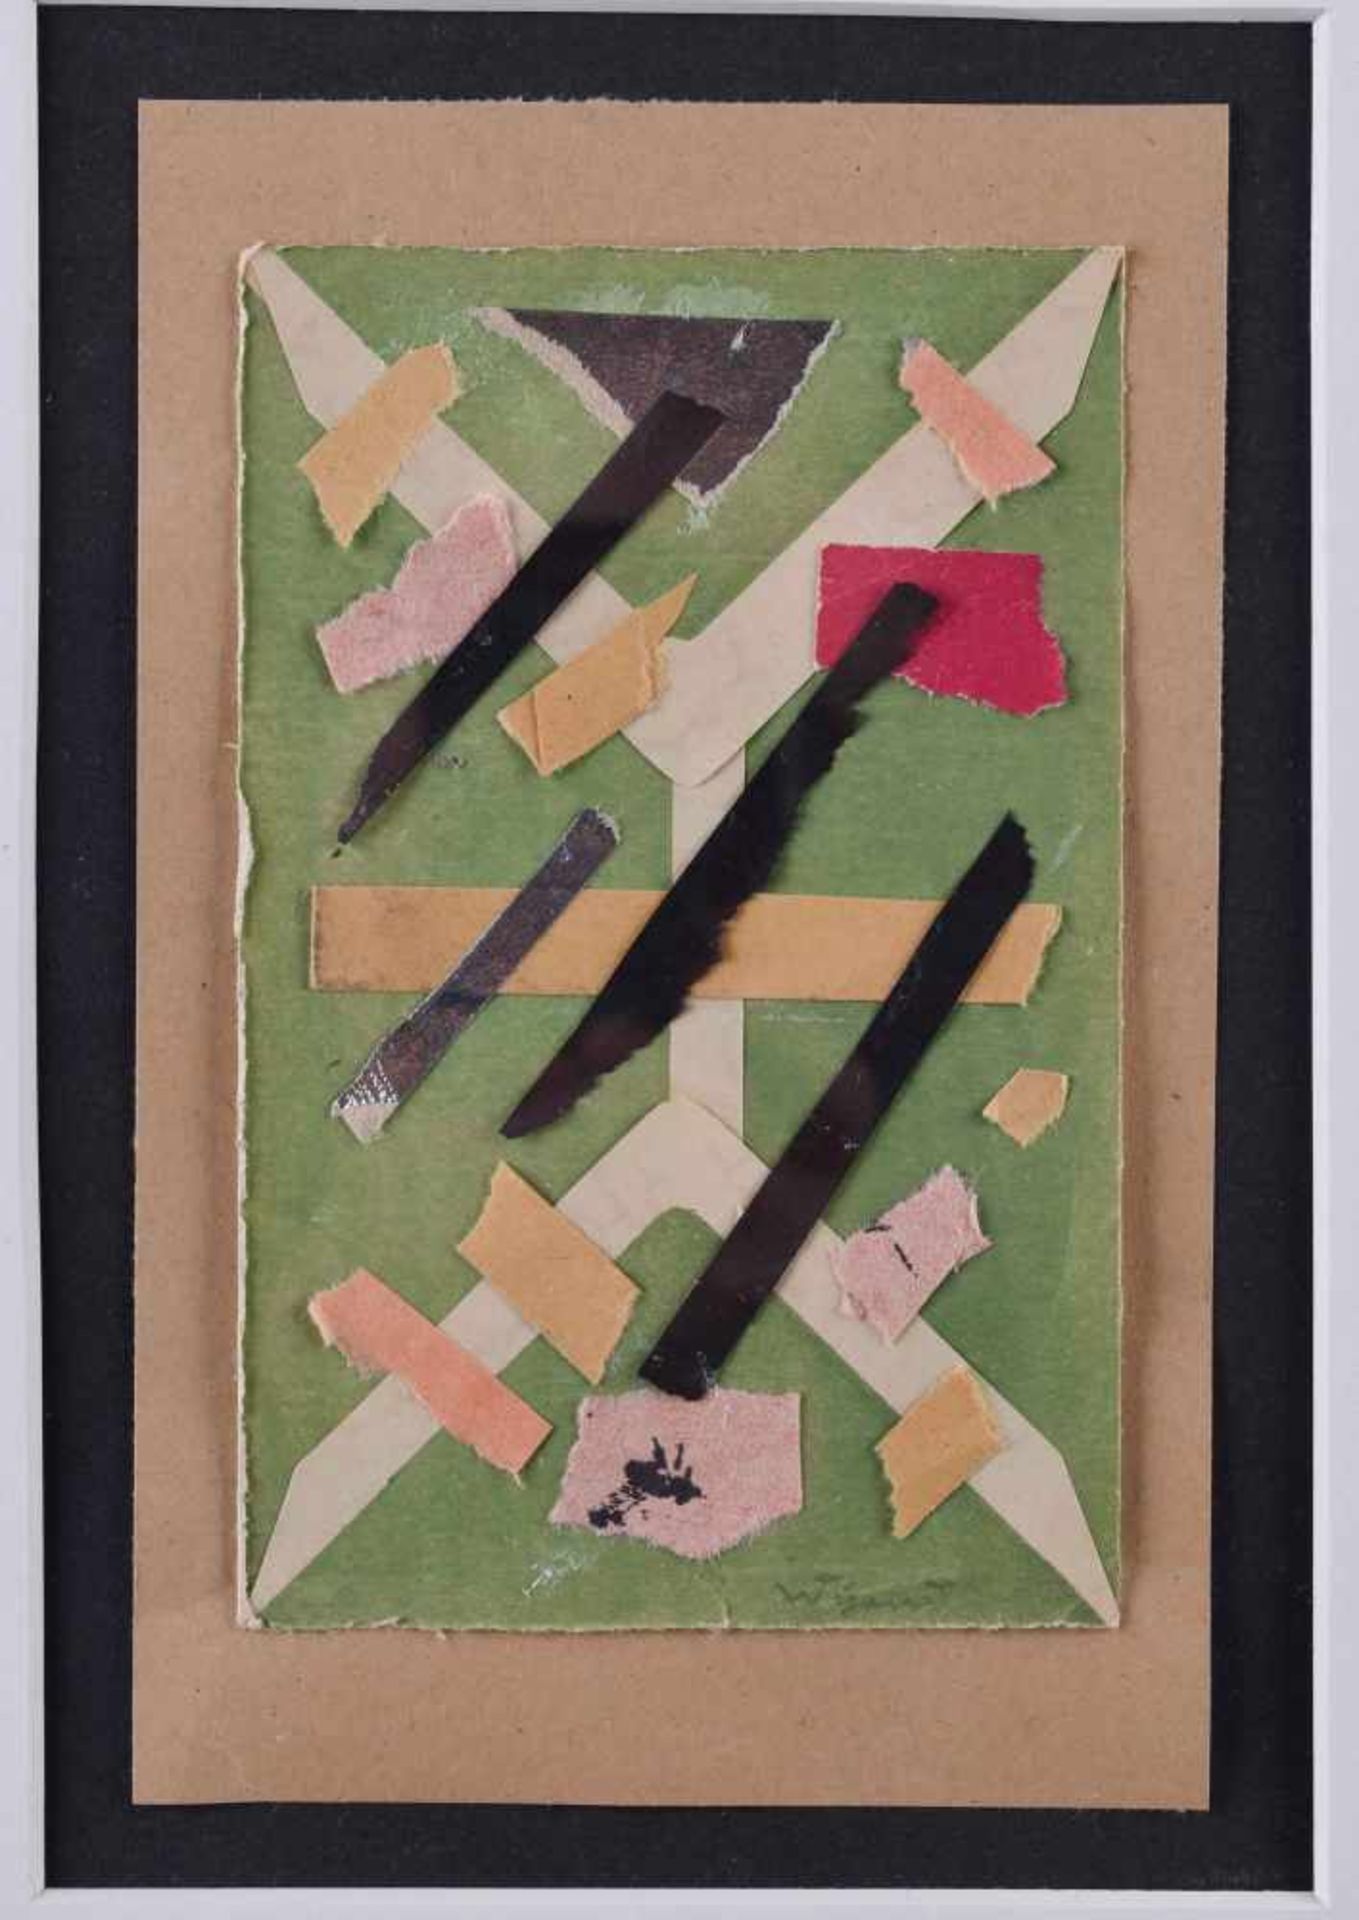 Albert WIGAND (1890-1978)"Untitled"collage, 15.3 cm x 9.9 cm,signed on the lower right,to be paid by